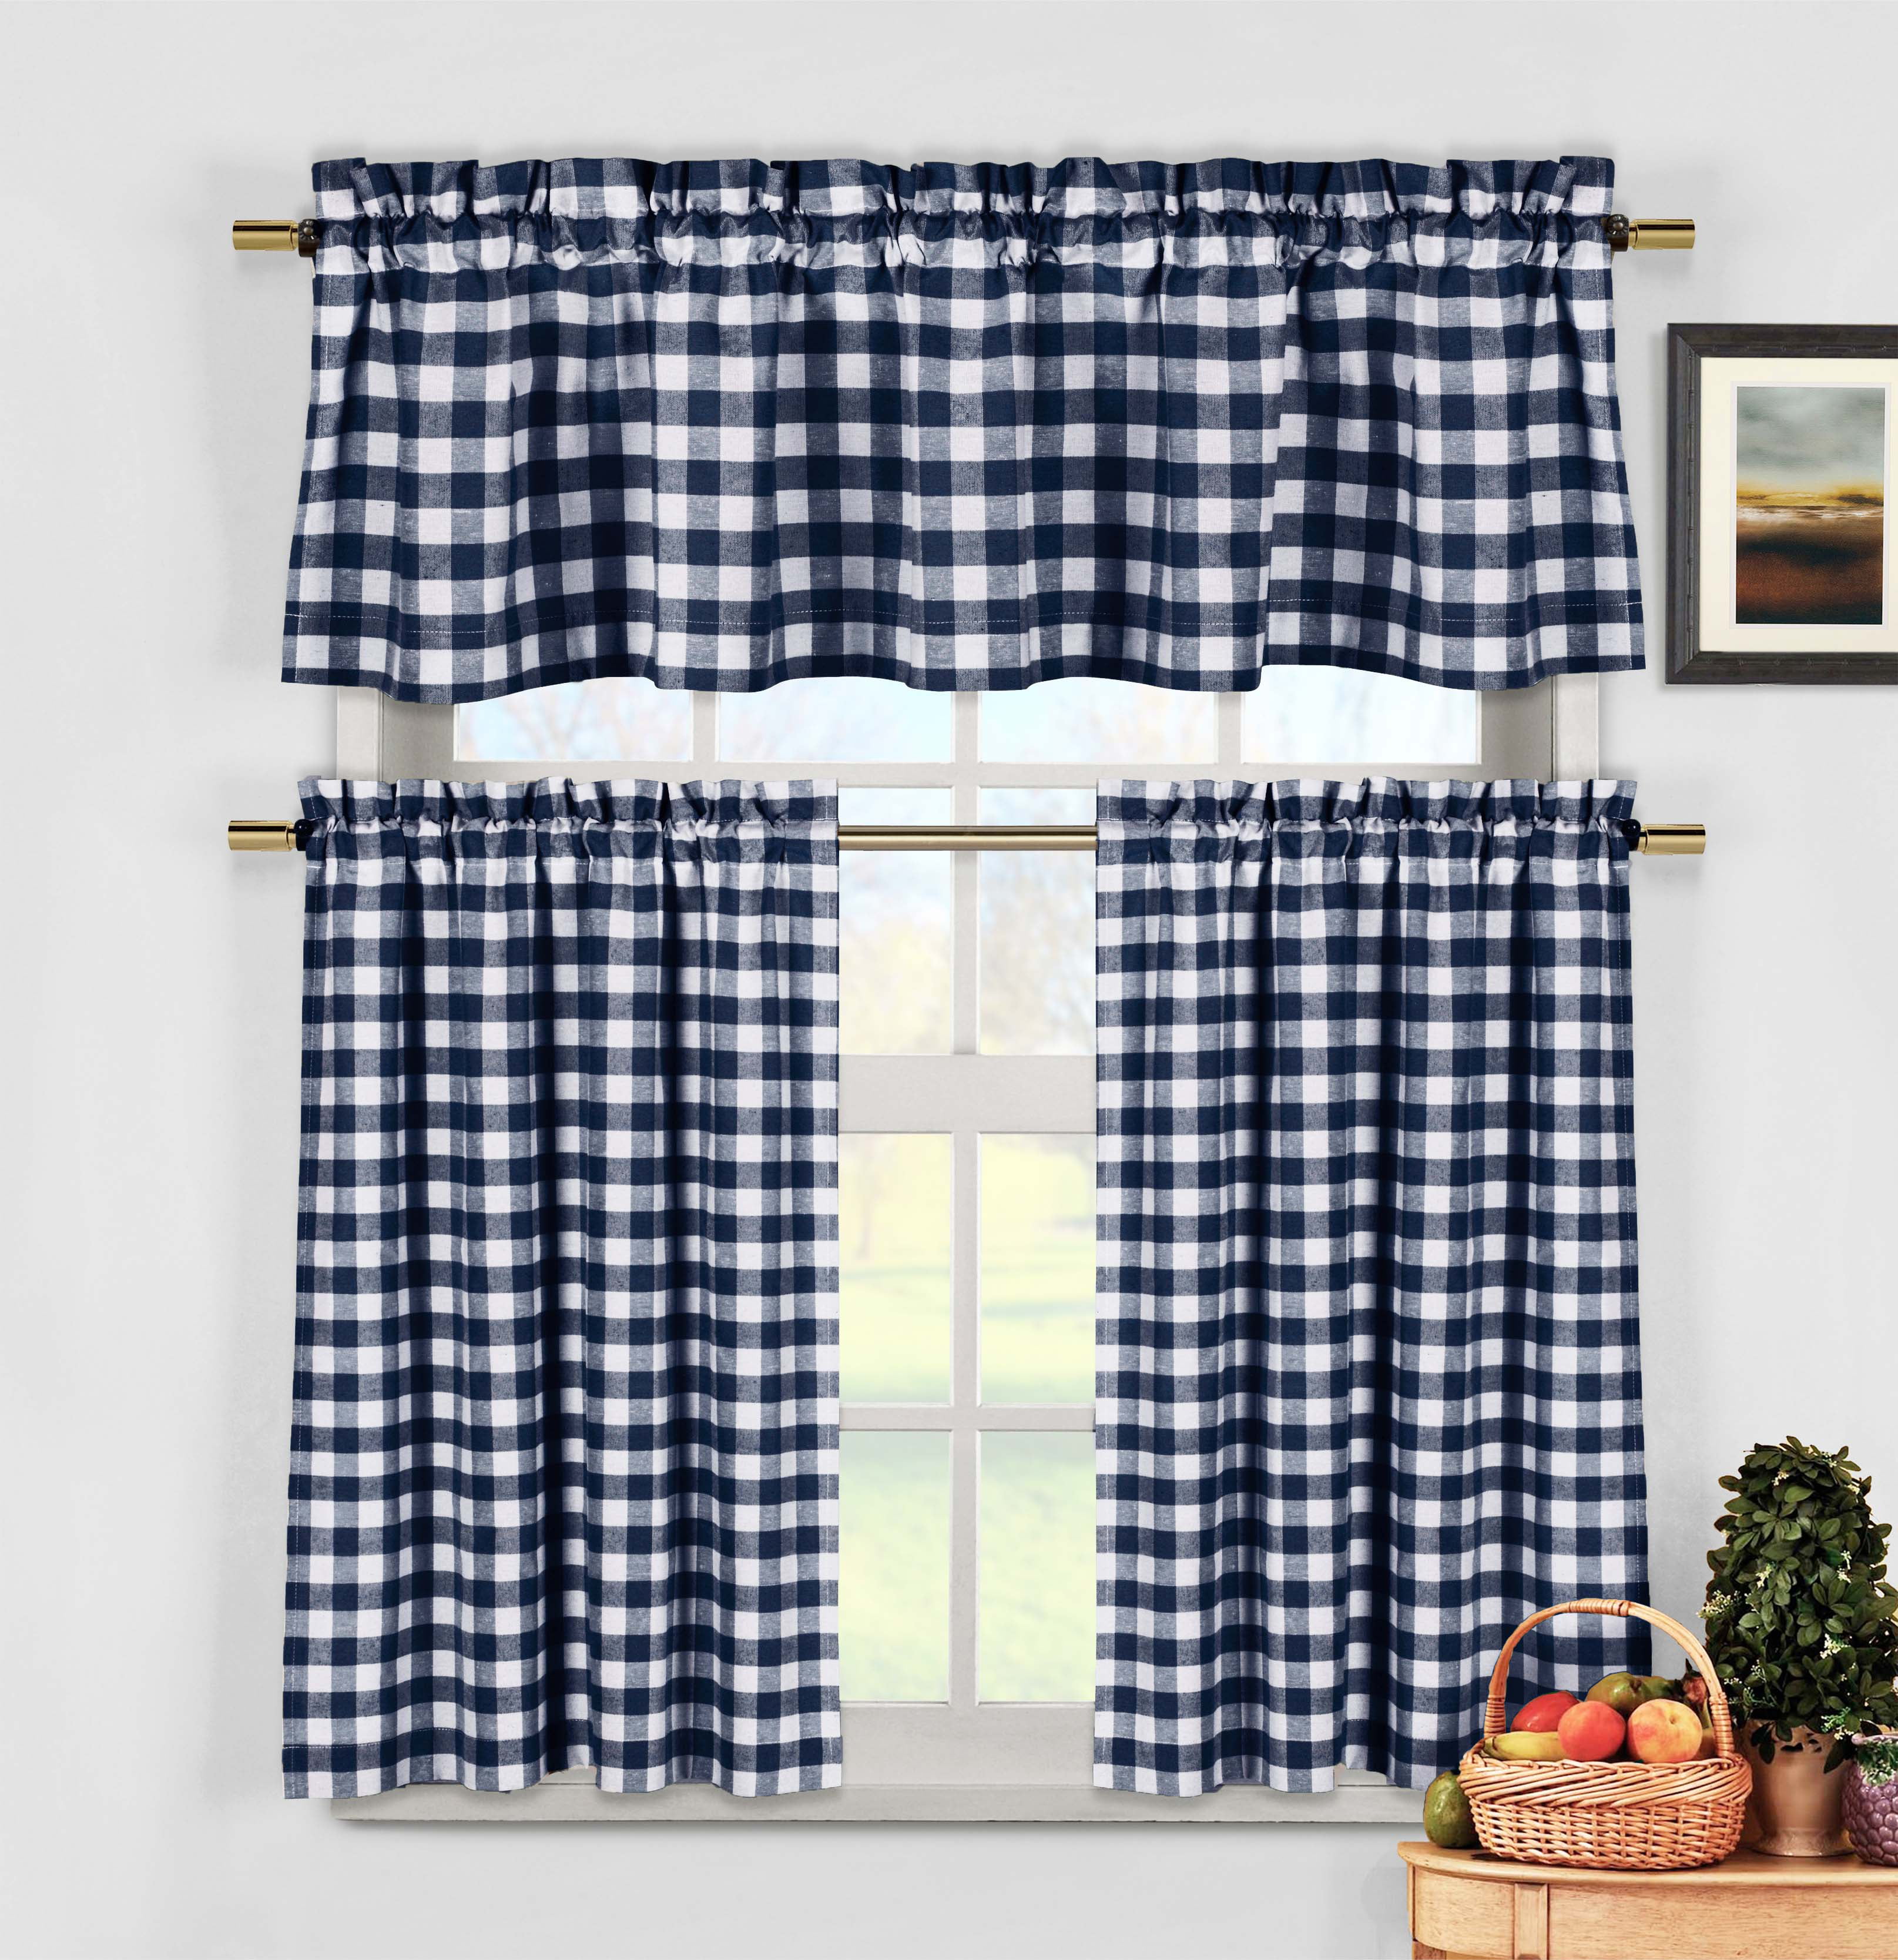 Kitchen Window Curtain Classic Harvard Checkered Tiers or Valance Black 